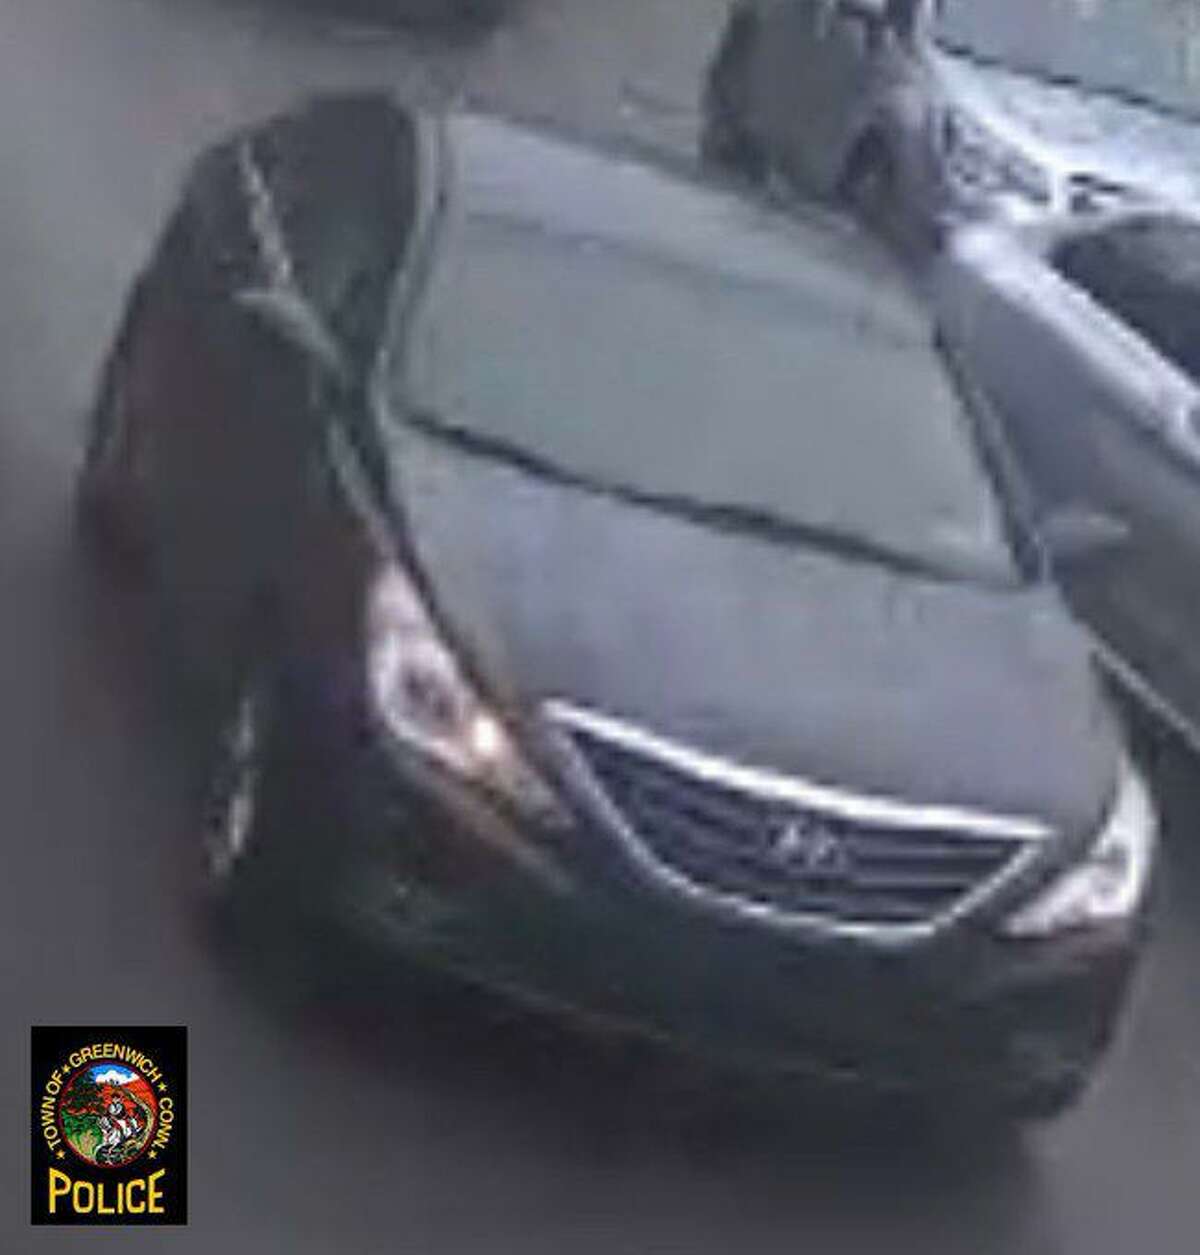 Police said the getaway car was a Hyundai and posted this photo of it.